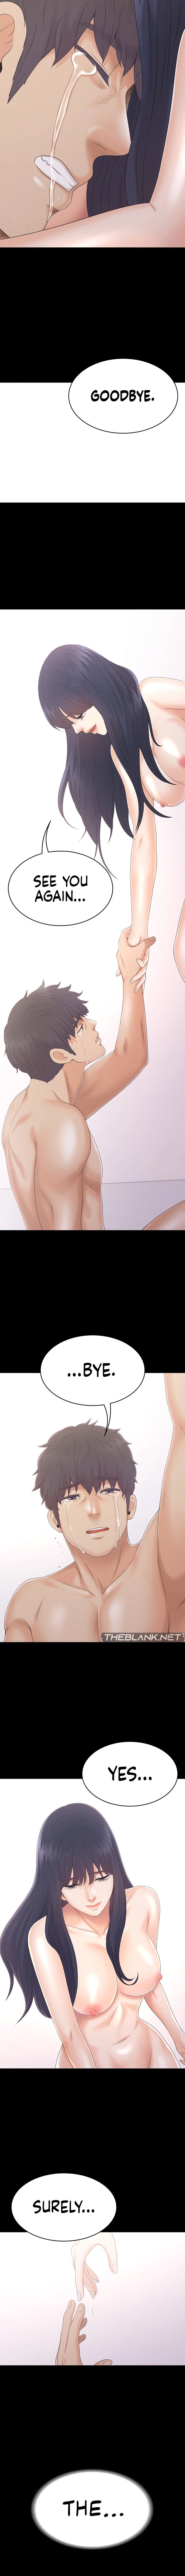 stuck-in-time-chap-23-13